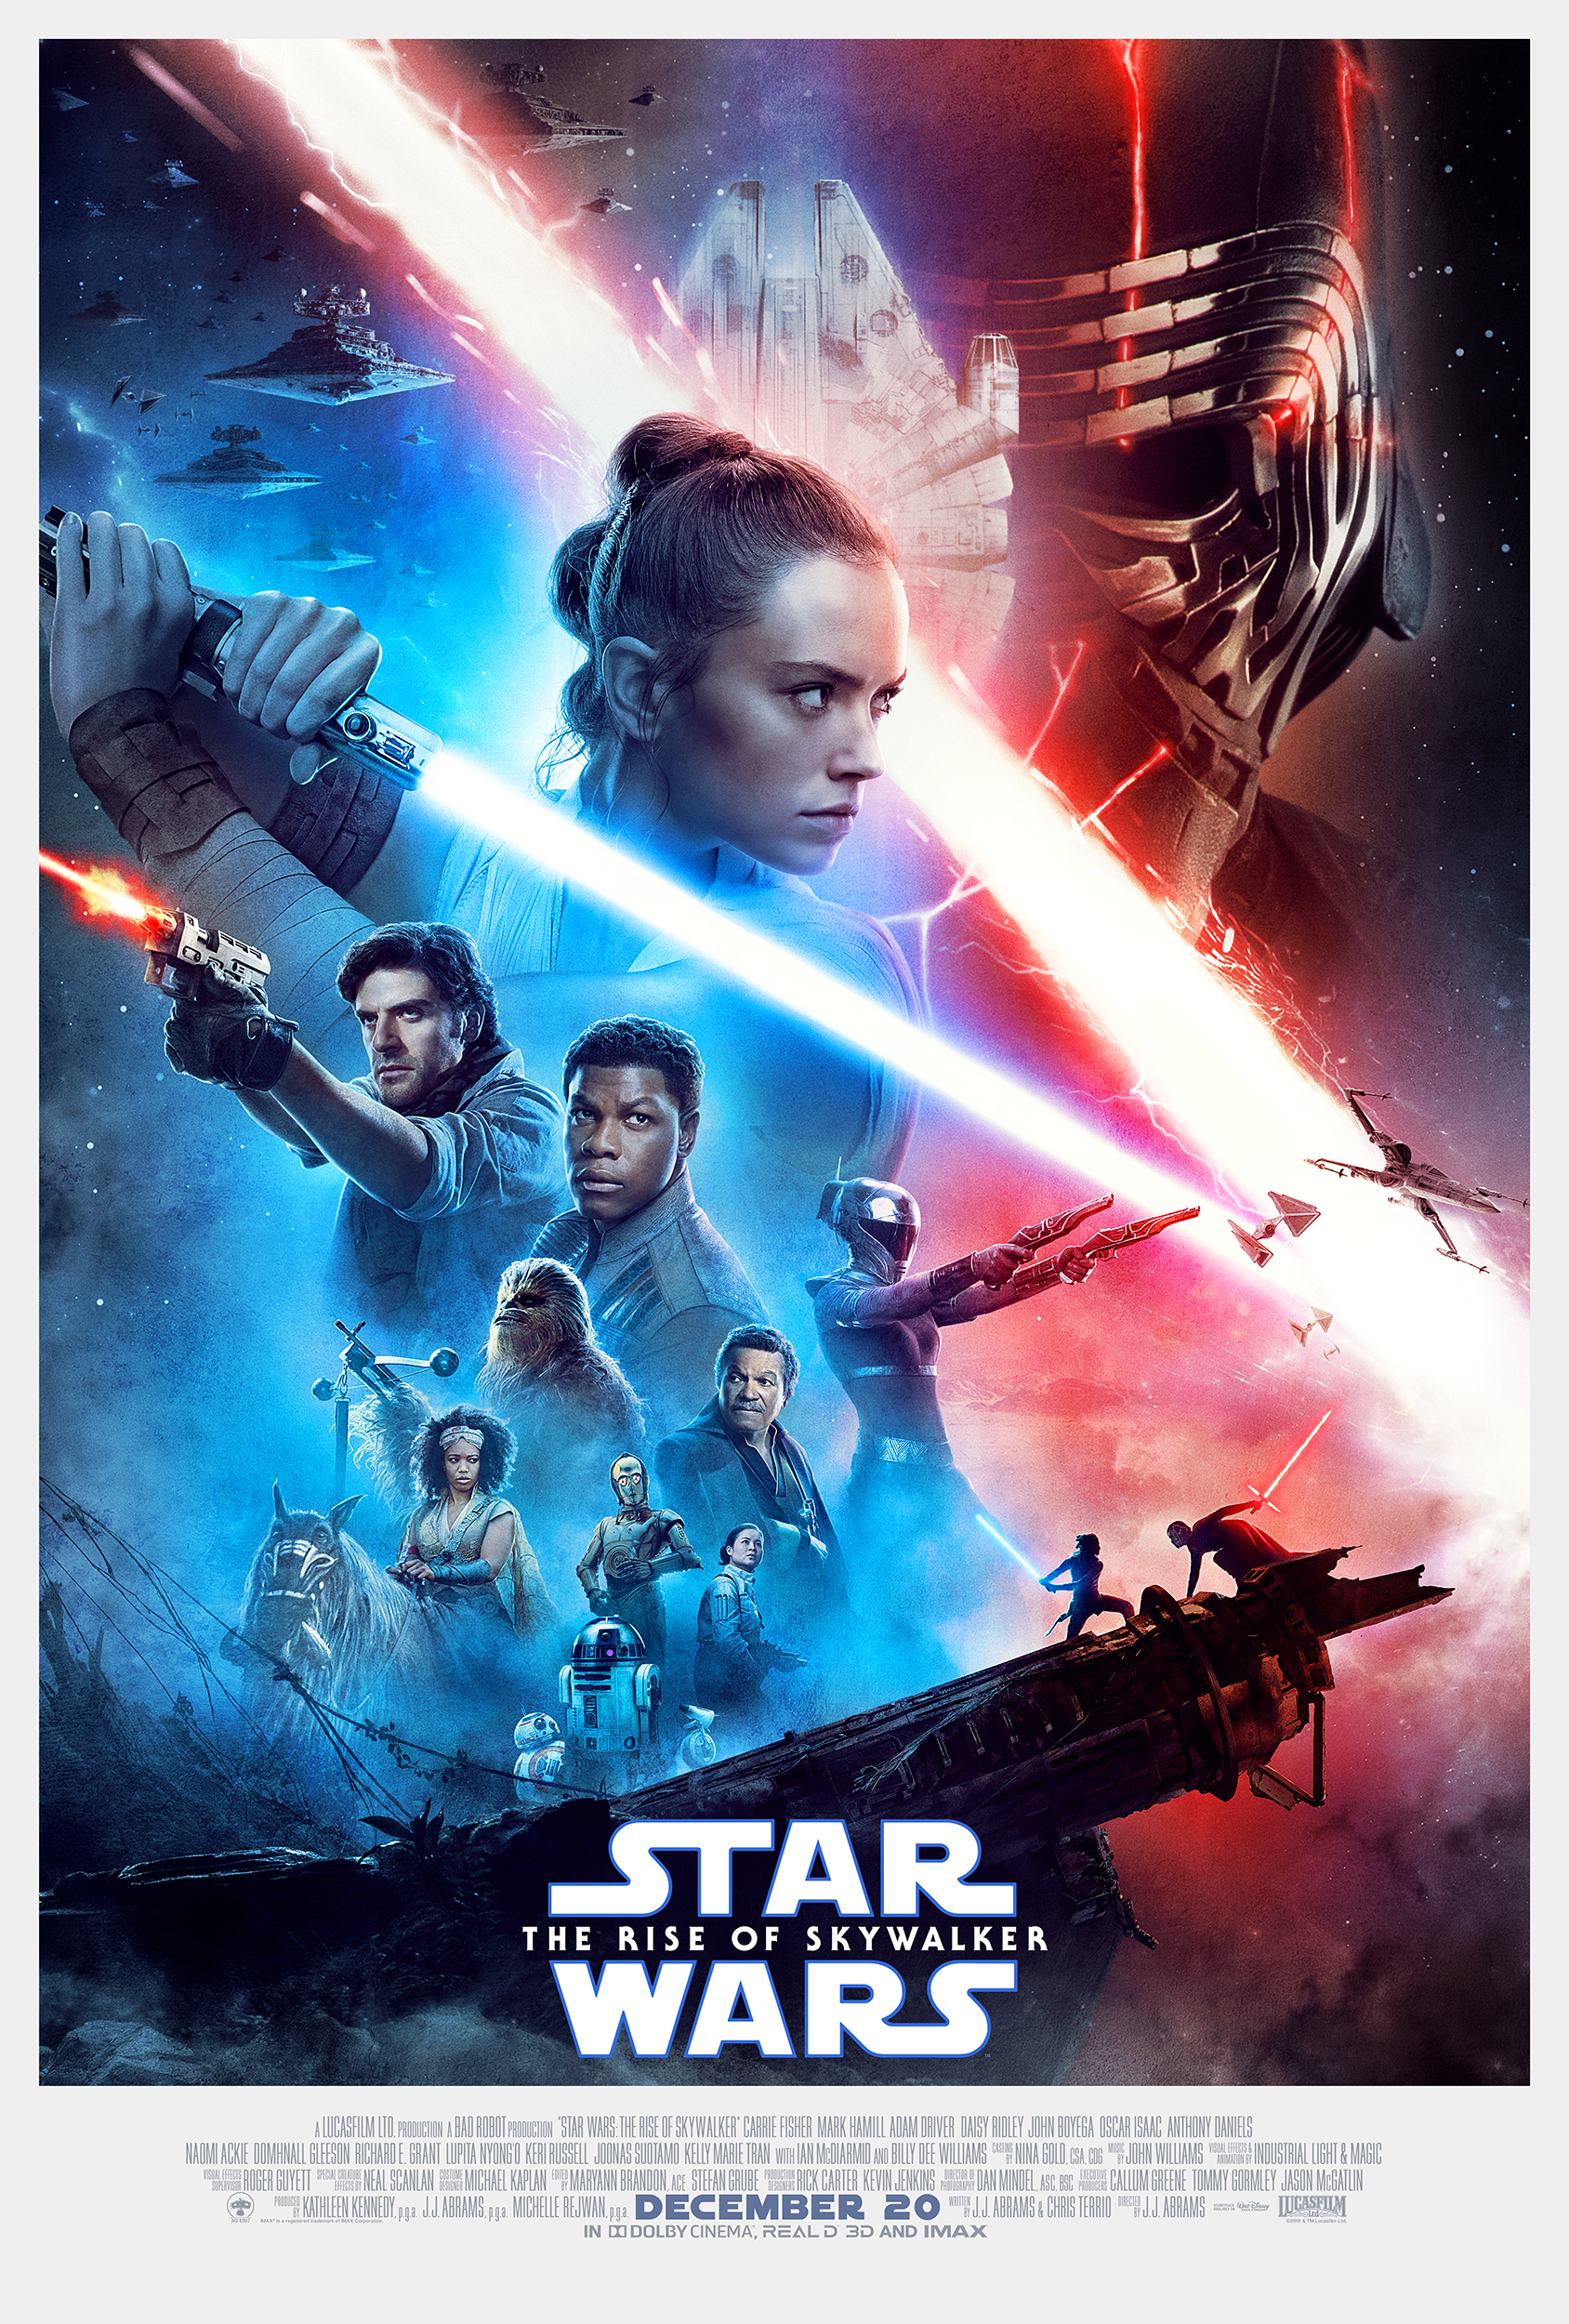 [News] STAR WARS: THE RISE OF SKYWALKER Arrives on Disney+ on May 4